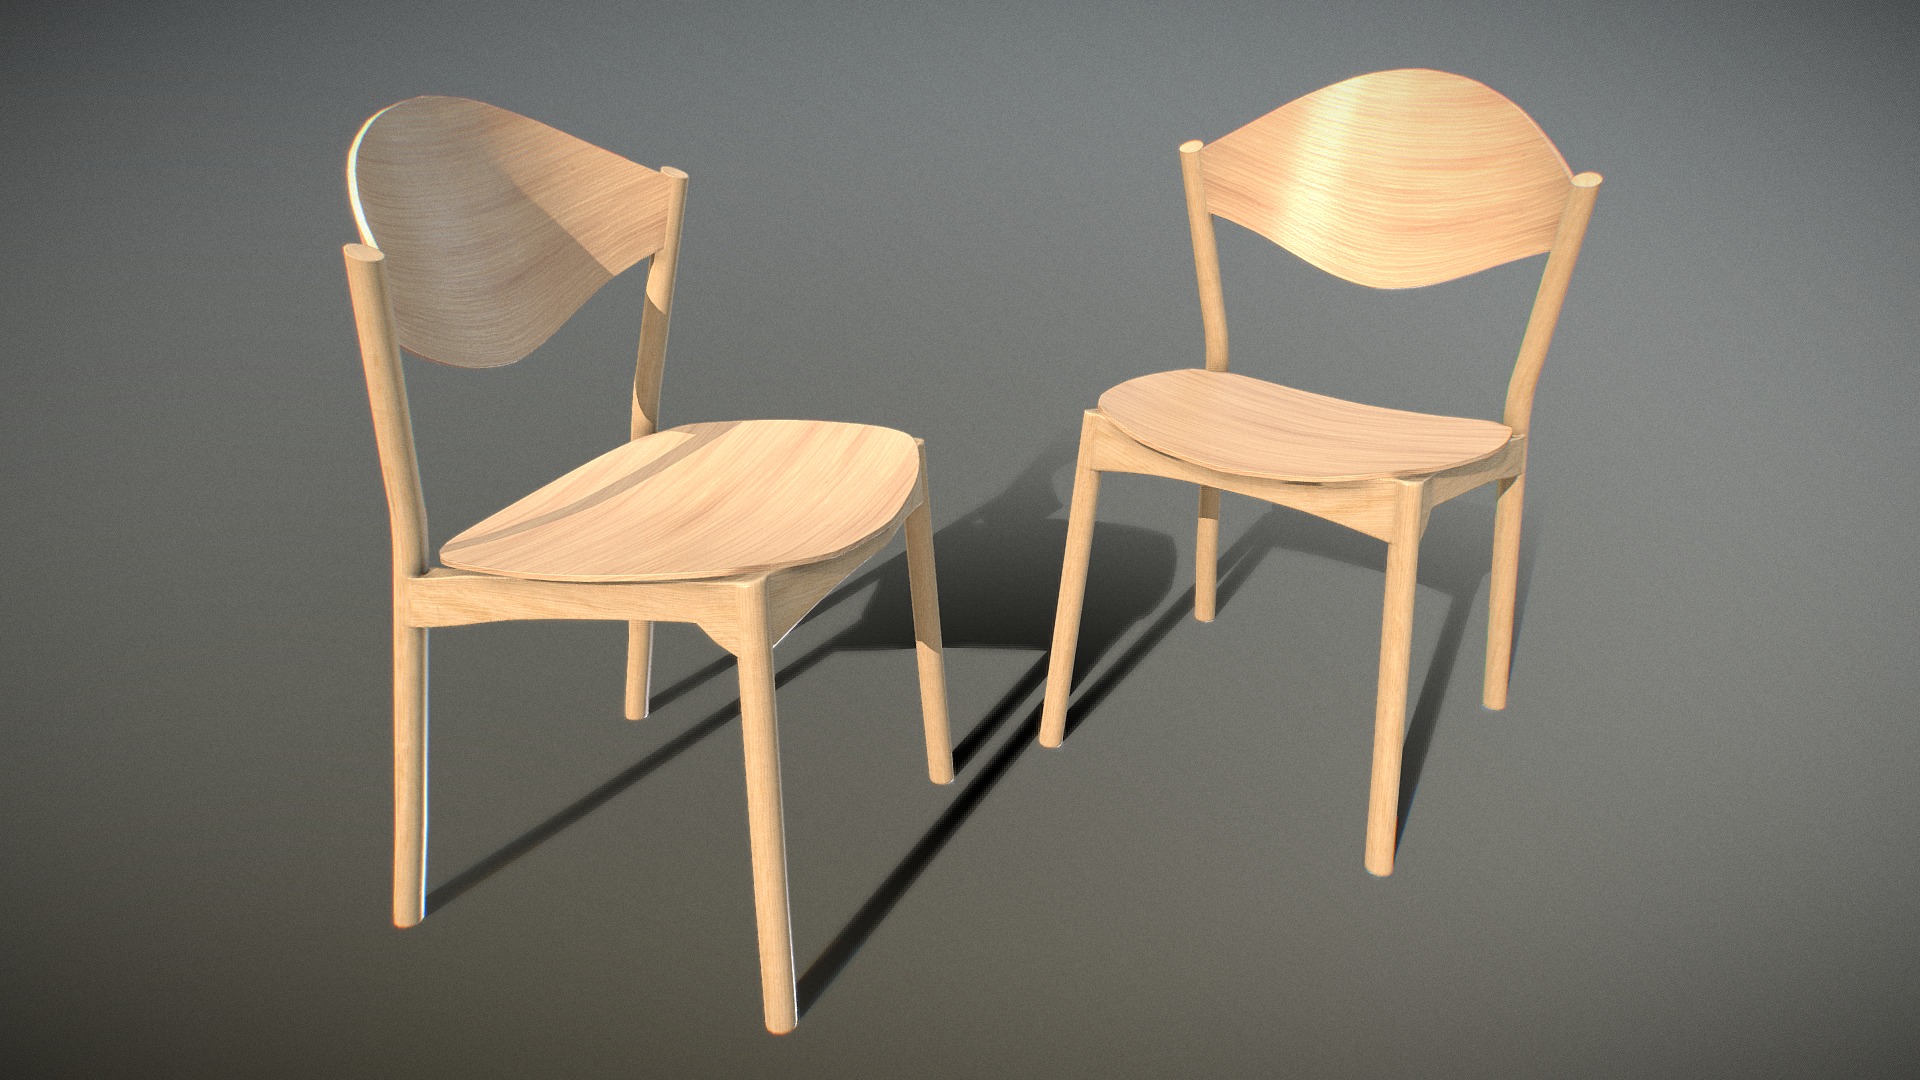 3D model Chairs HQ - This is a 3D model of the Chairs HQ. The 3D model is about two chairs on a table.